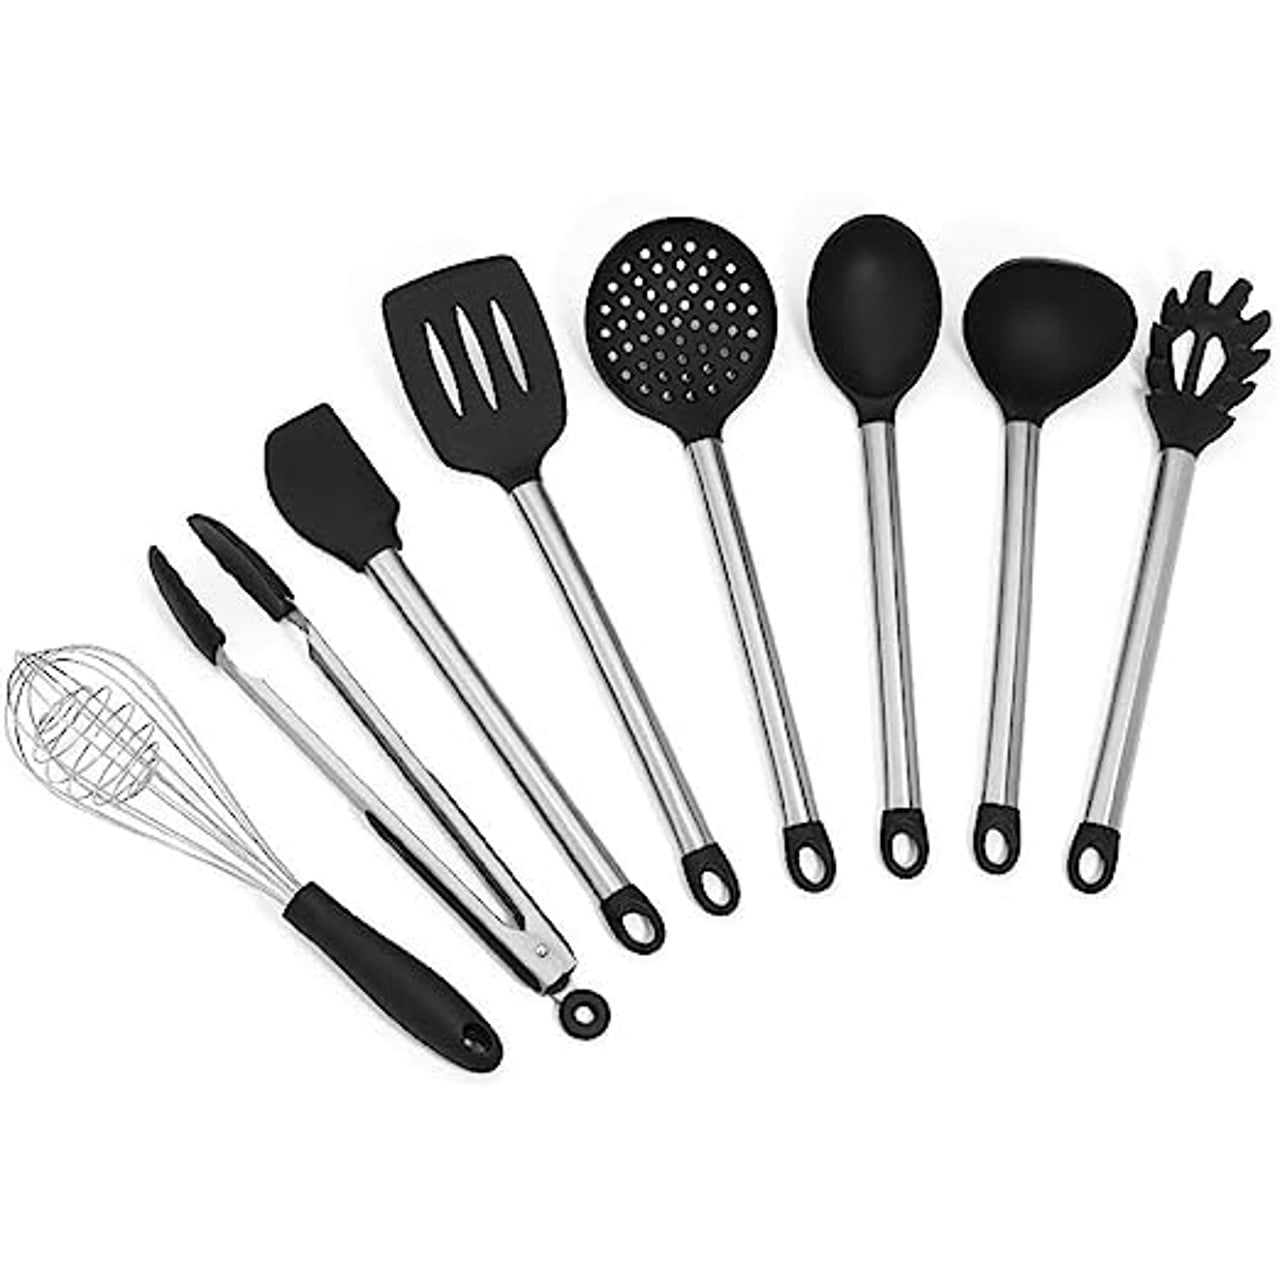  Artboil Mini Cooking Utensils set, 8 Silicone Cooking